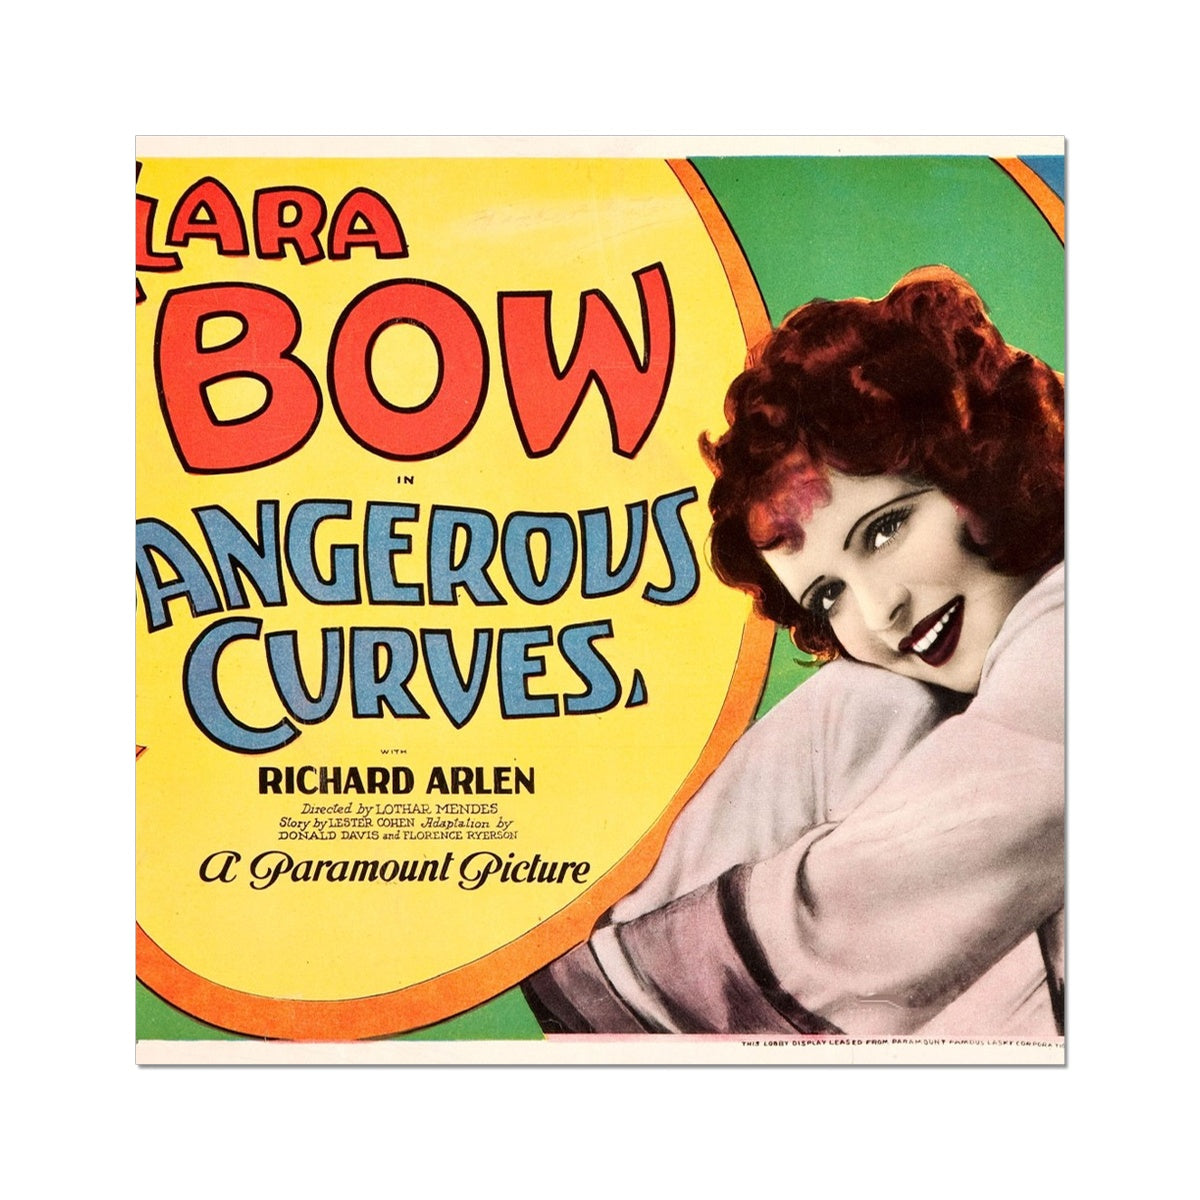 Clara Bow - Dangerous Curves Movie Poster Wall Art Poster